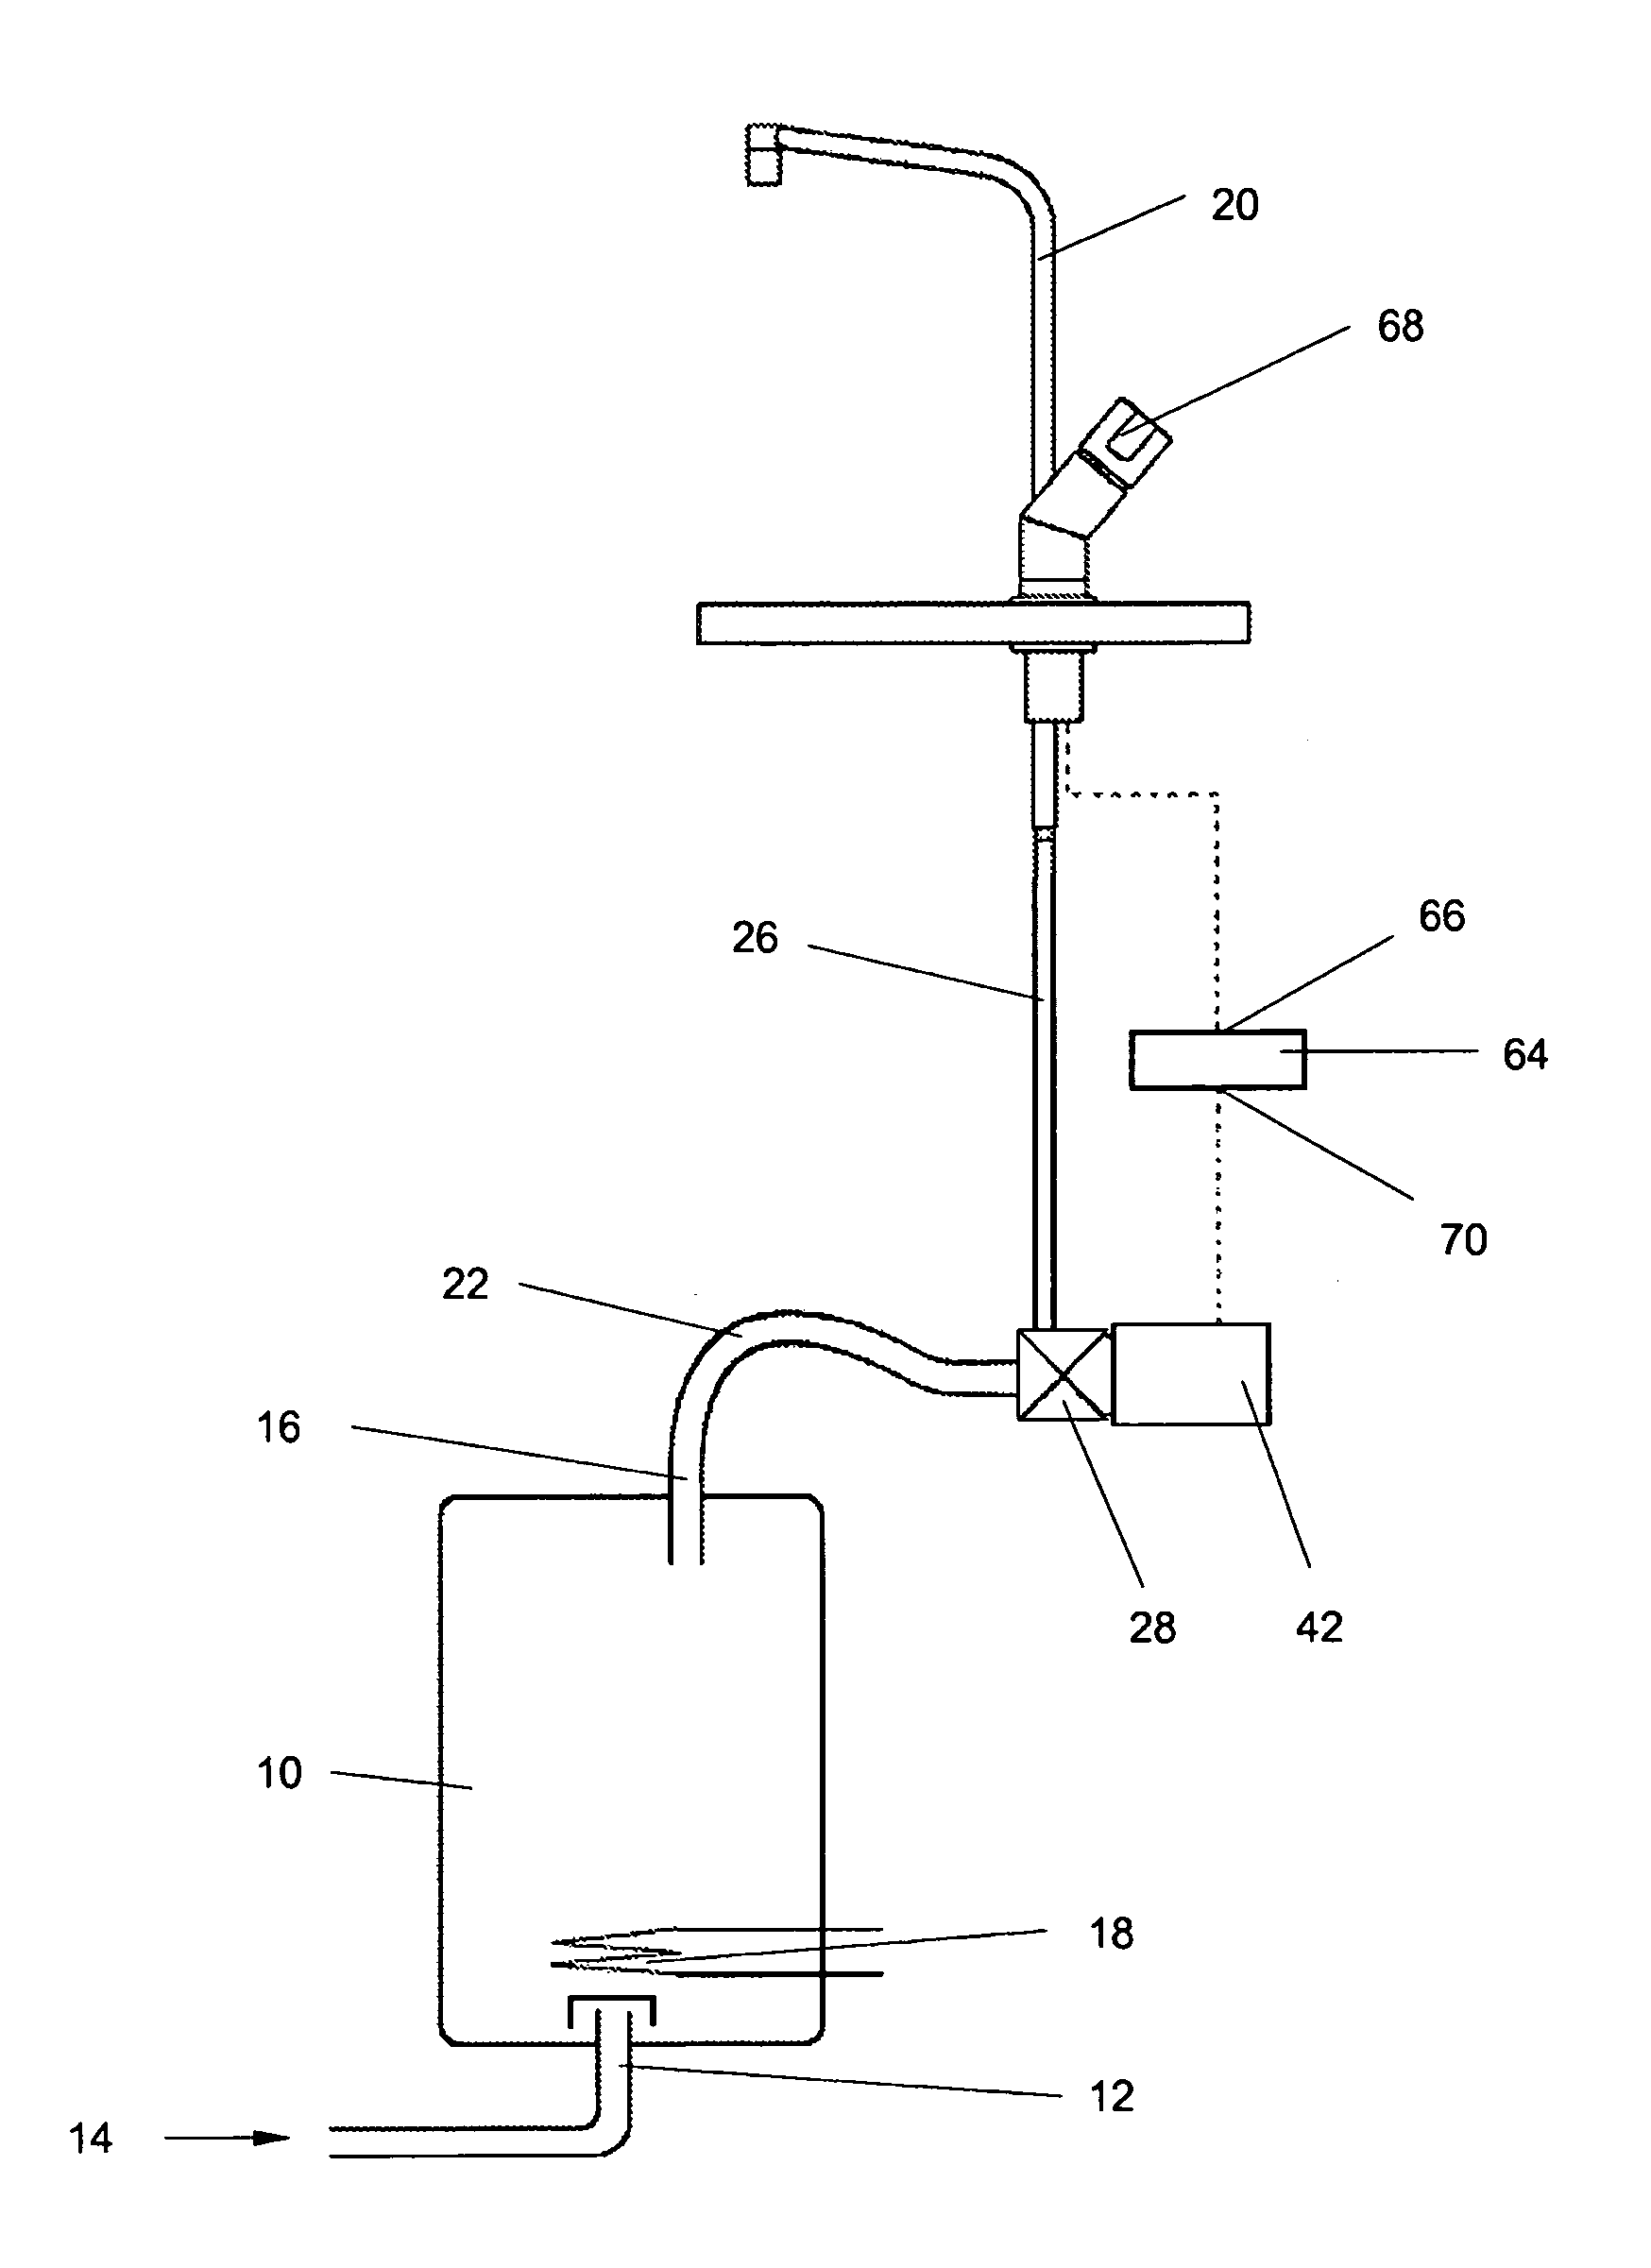 Apparatus for dispensing hot or boiling water